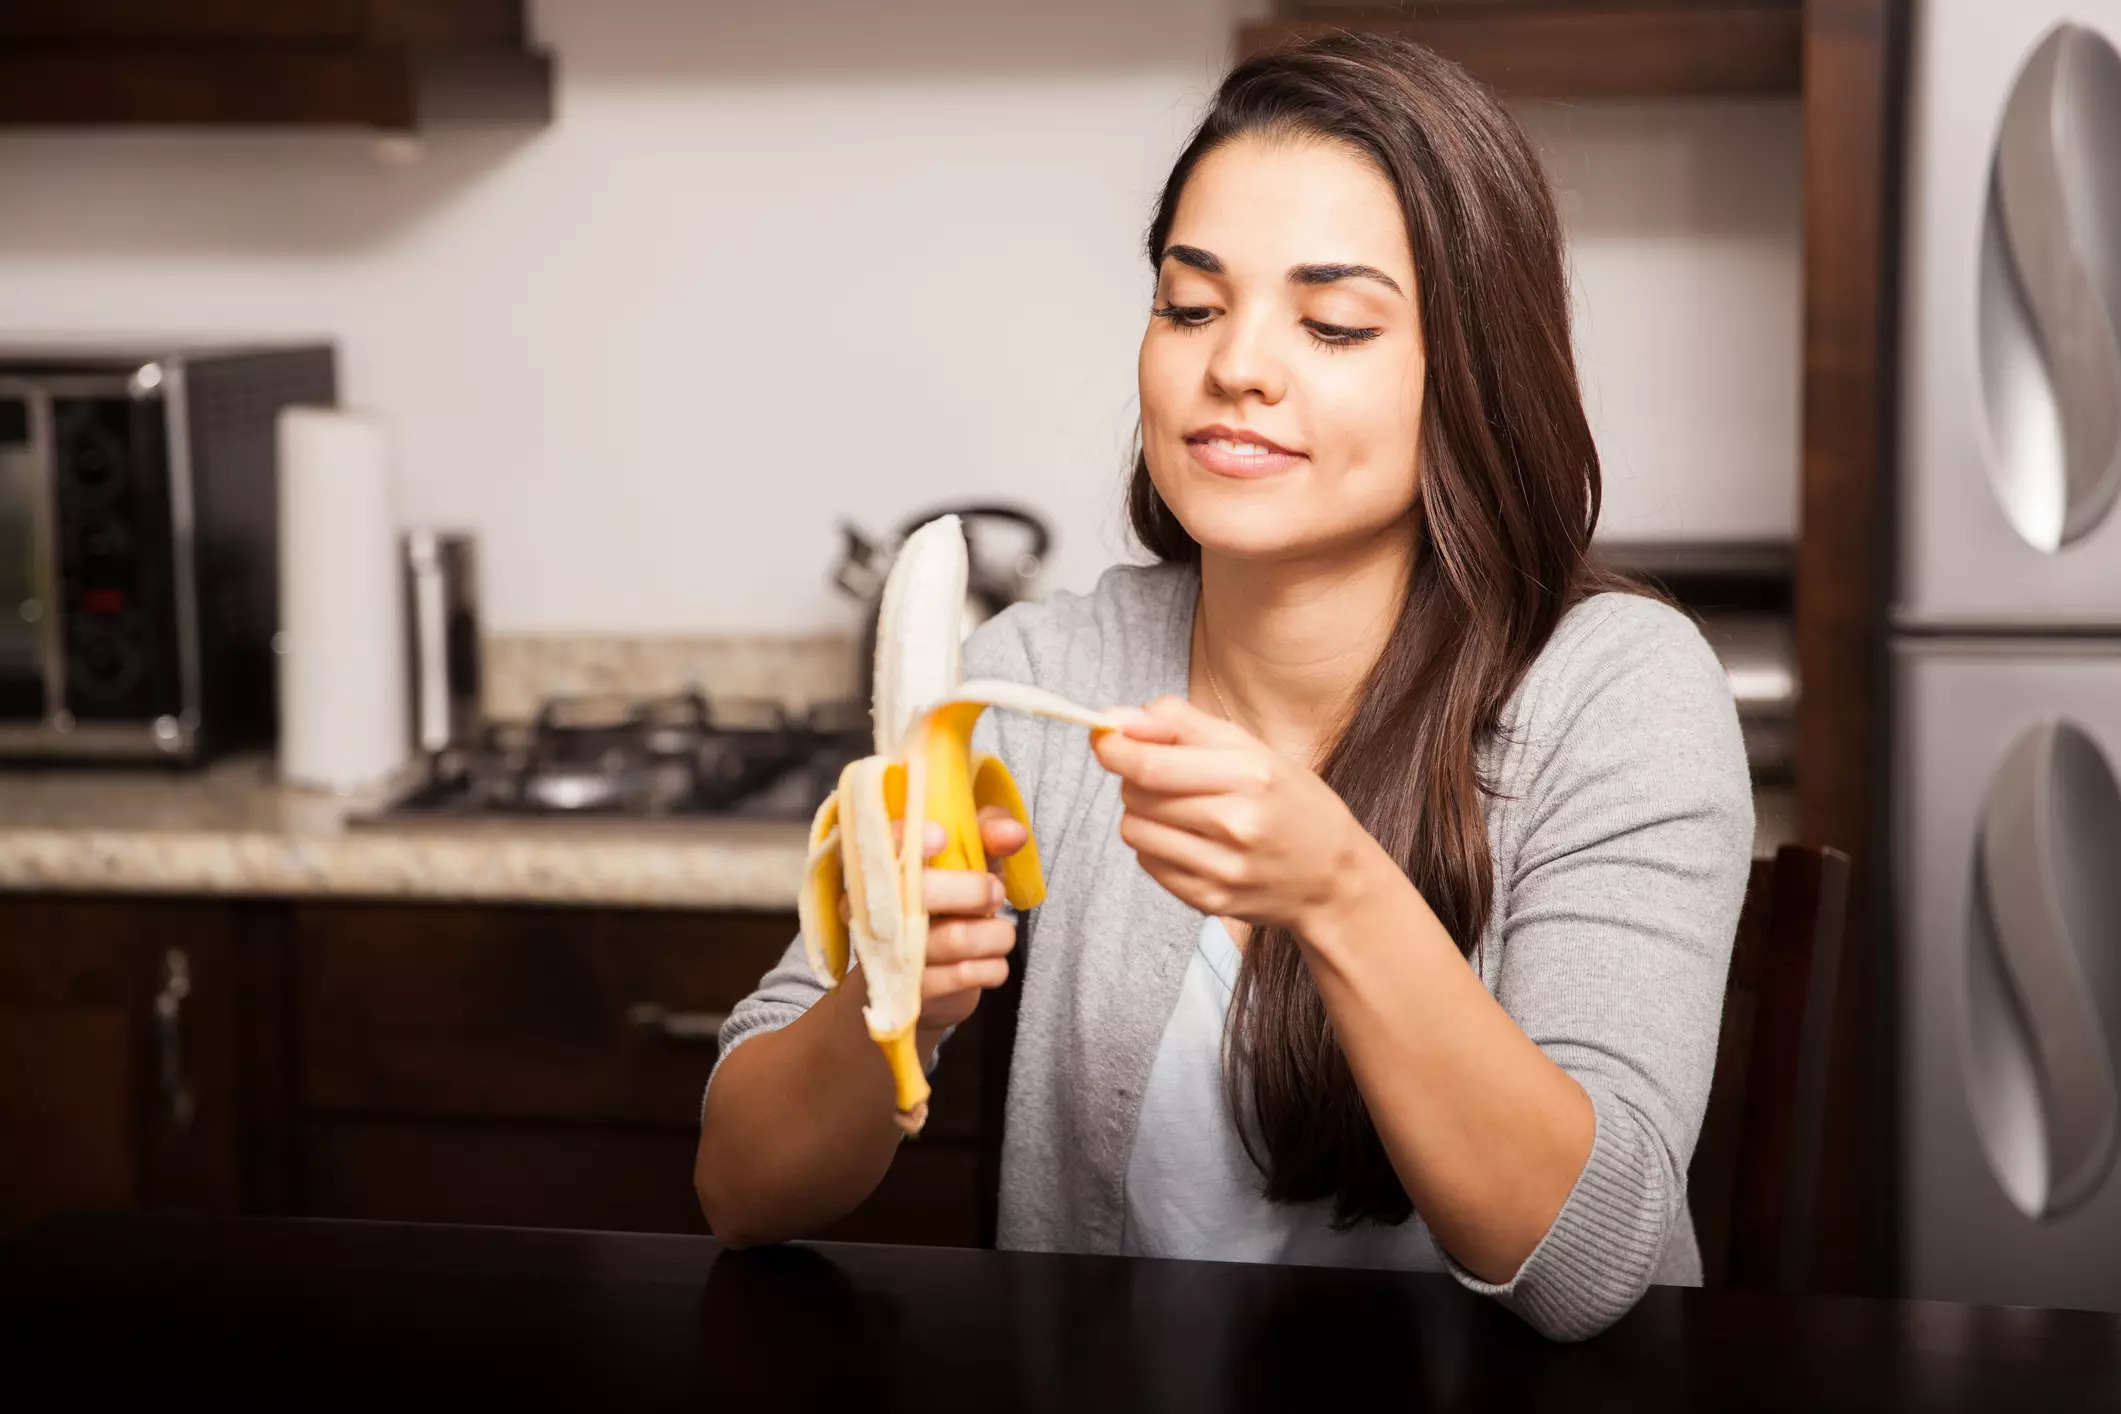 Eating bananas every day can enhance day and night vision.